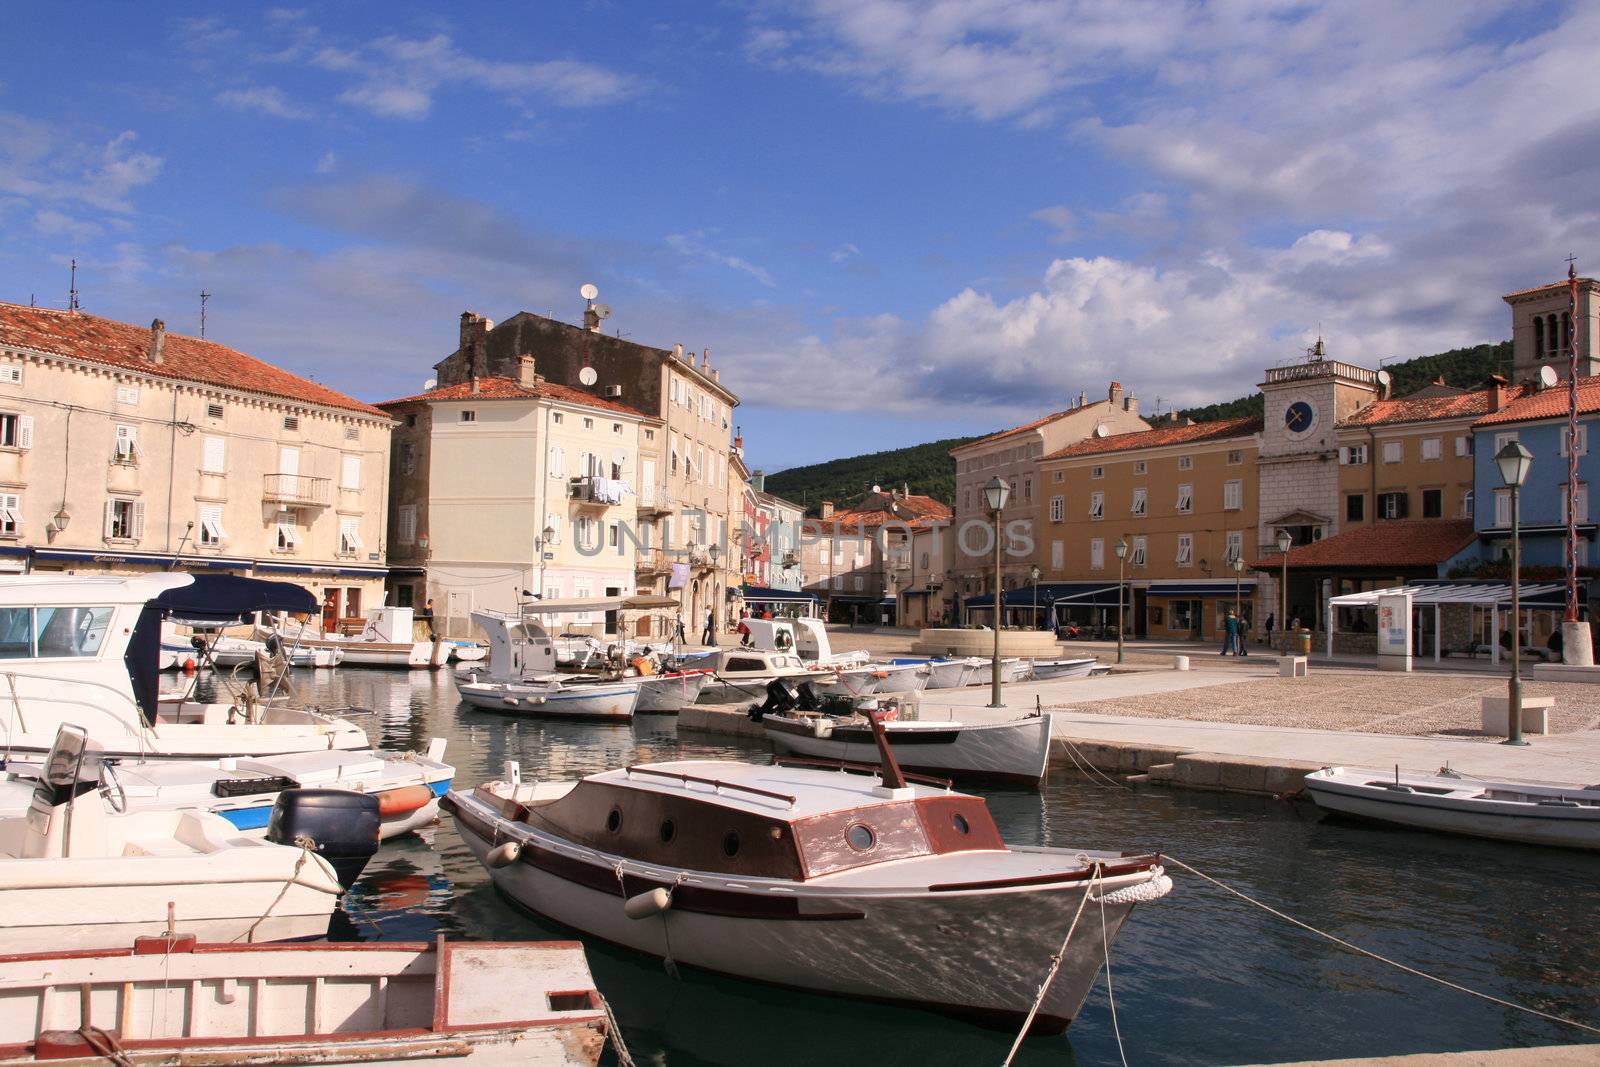 View of the harbor from the town of Cres on the island of Cres in Croatia